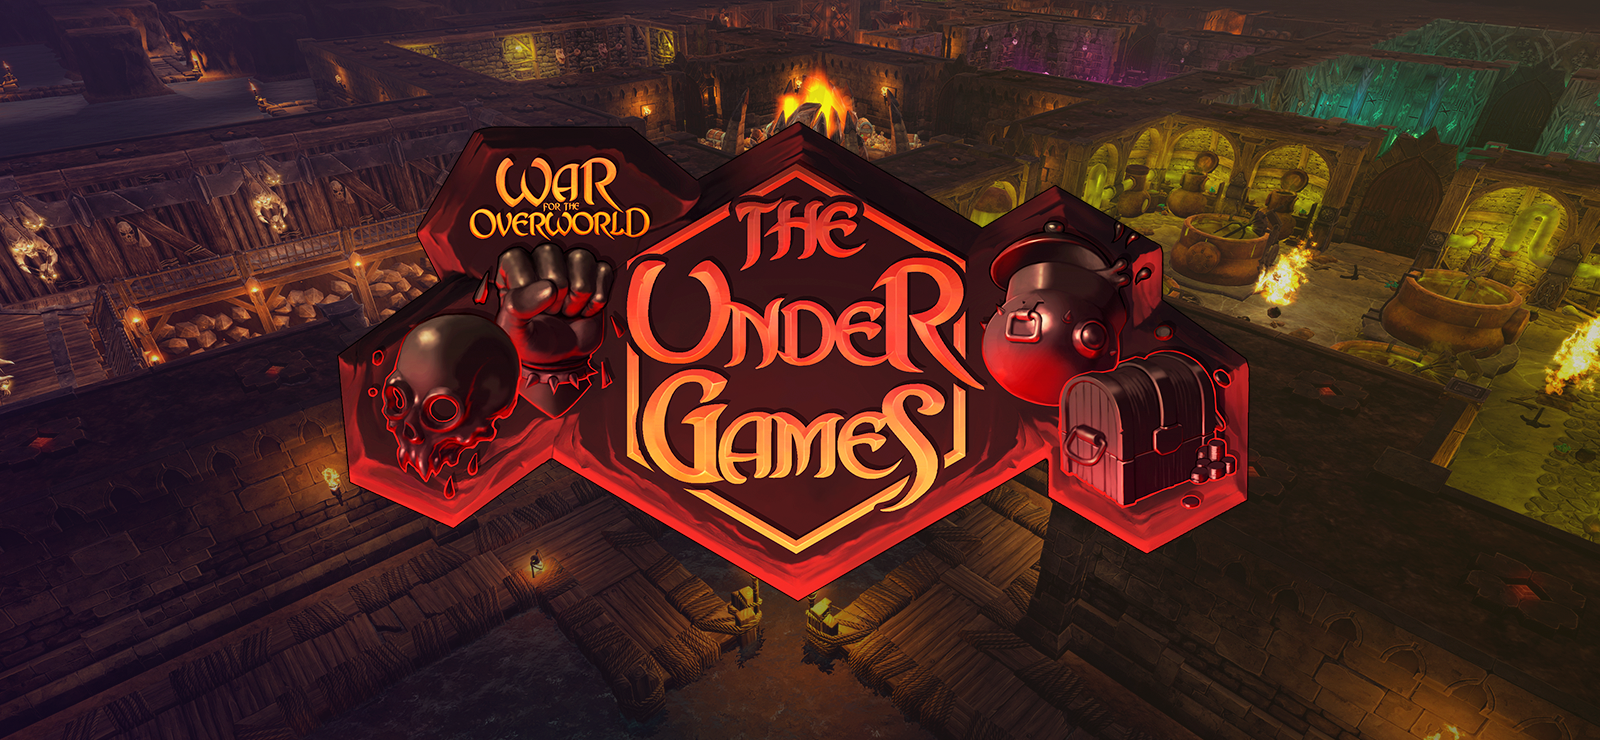 War For The Overworld: The Under Games